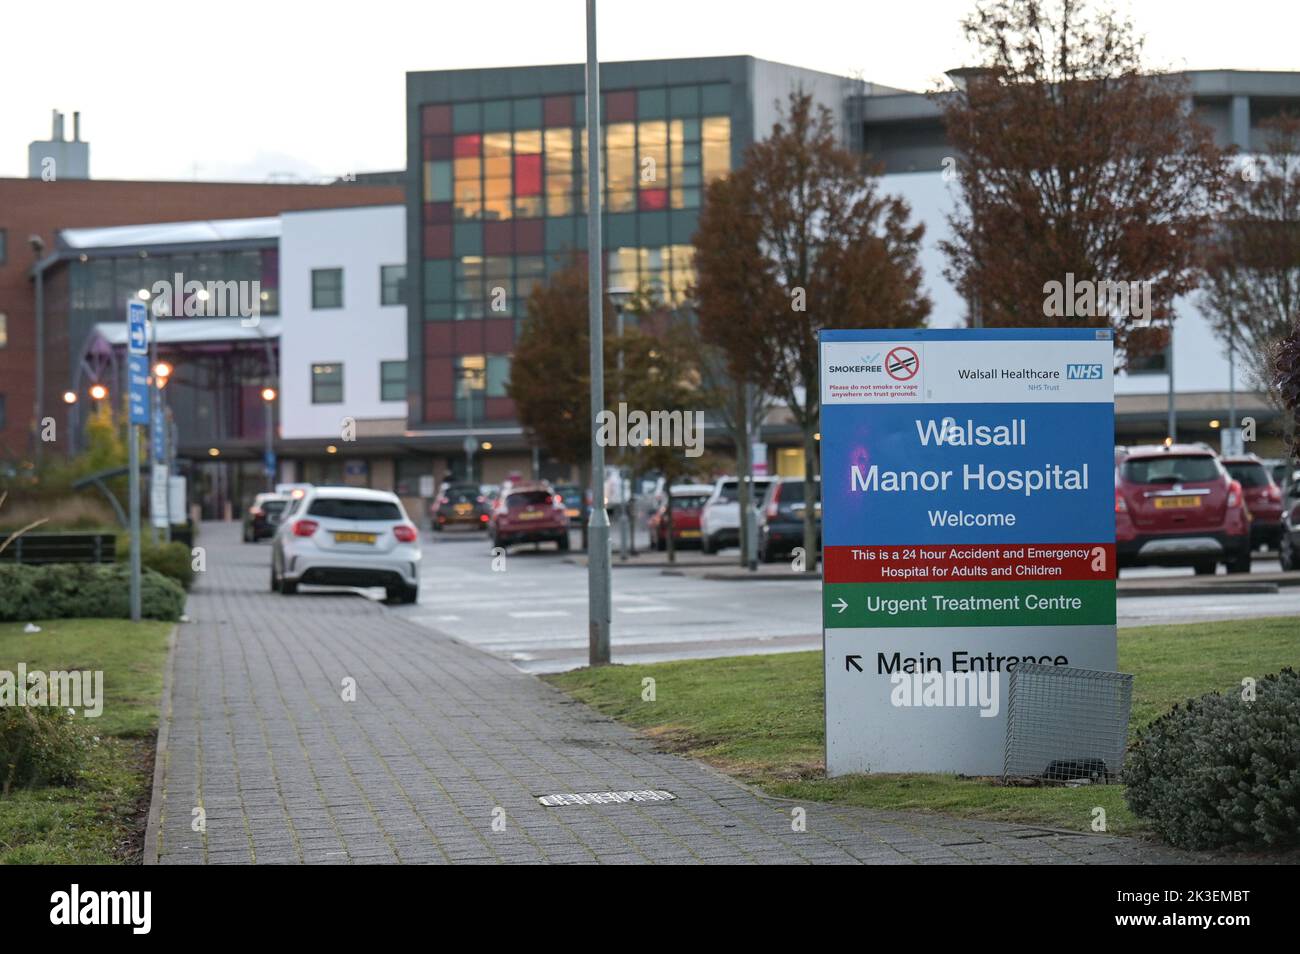 Moat Road, Walsall - 26th 2022 settembre - Walsall Manor Hospital. PIC Credit: Scott CM/Alamy Live News Foto Stock